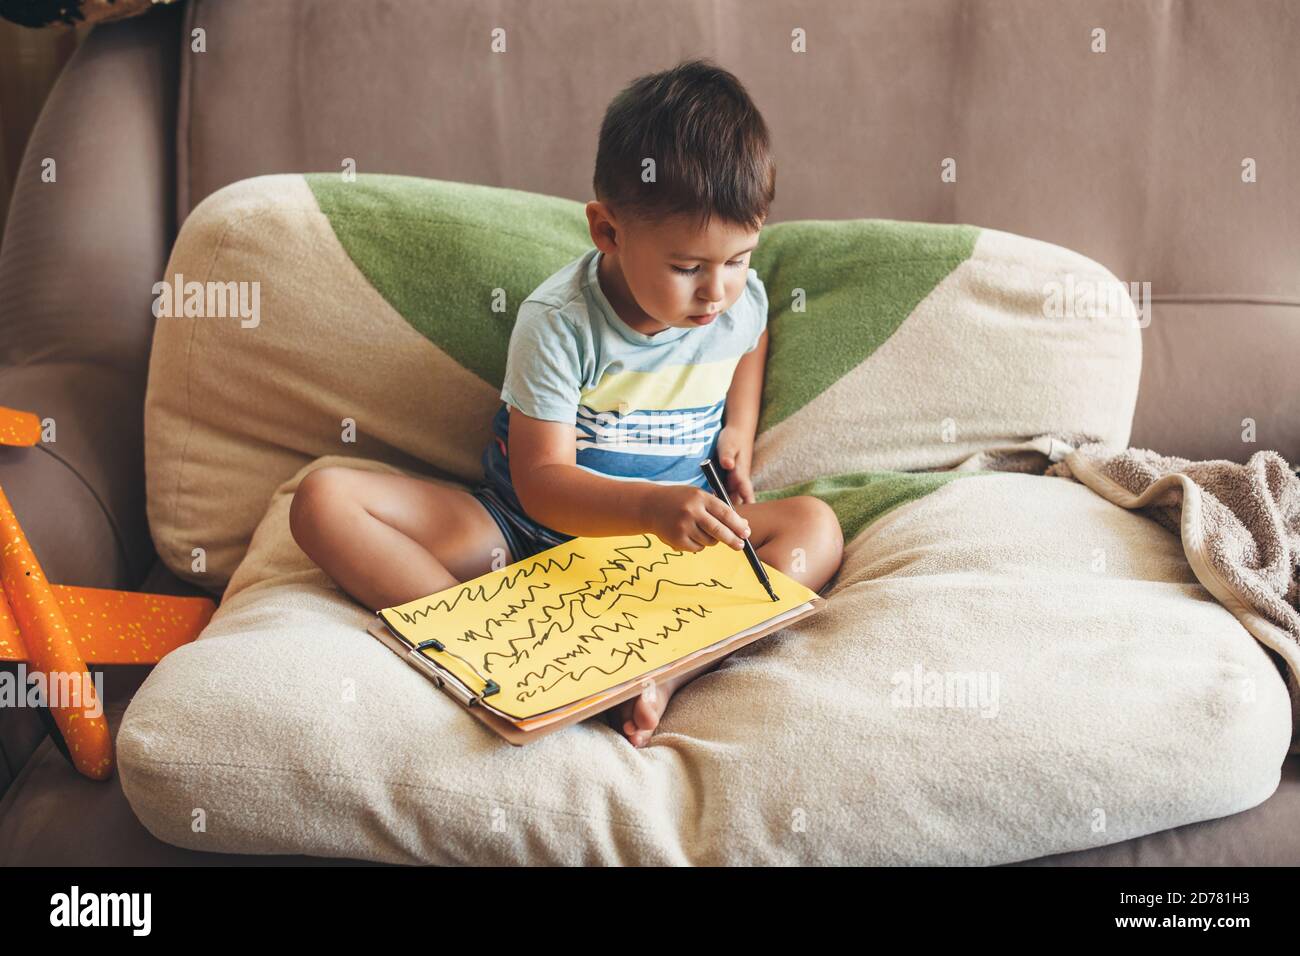 Caucasian boy drawing something on a yellow paper with a marker while sitting in bed on pillows Stock Photo